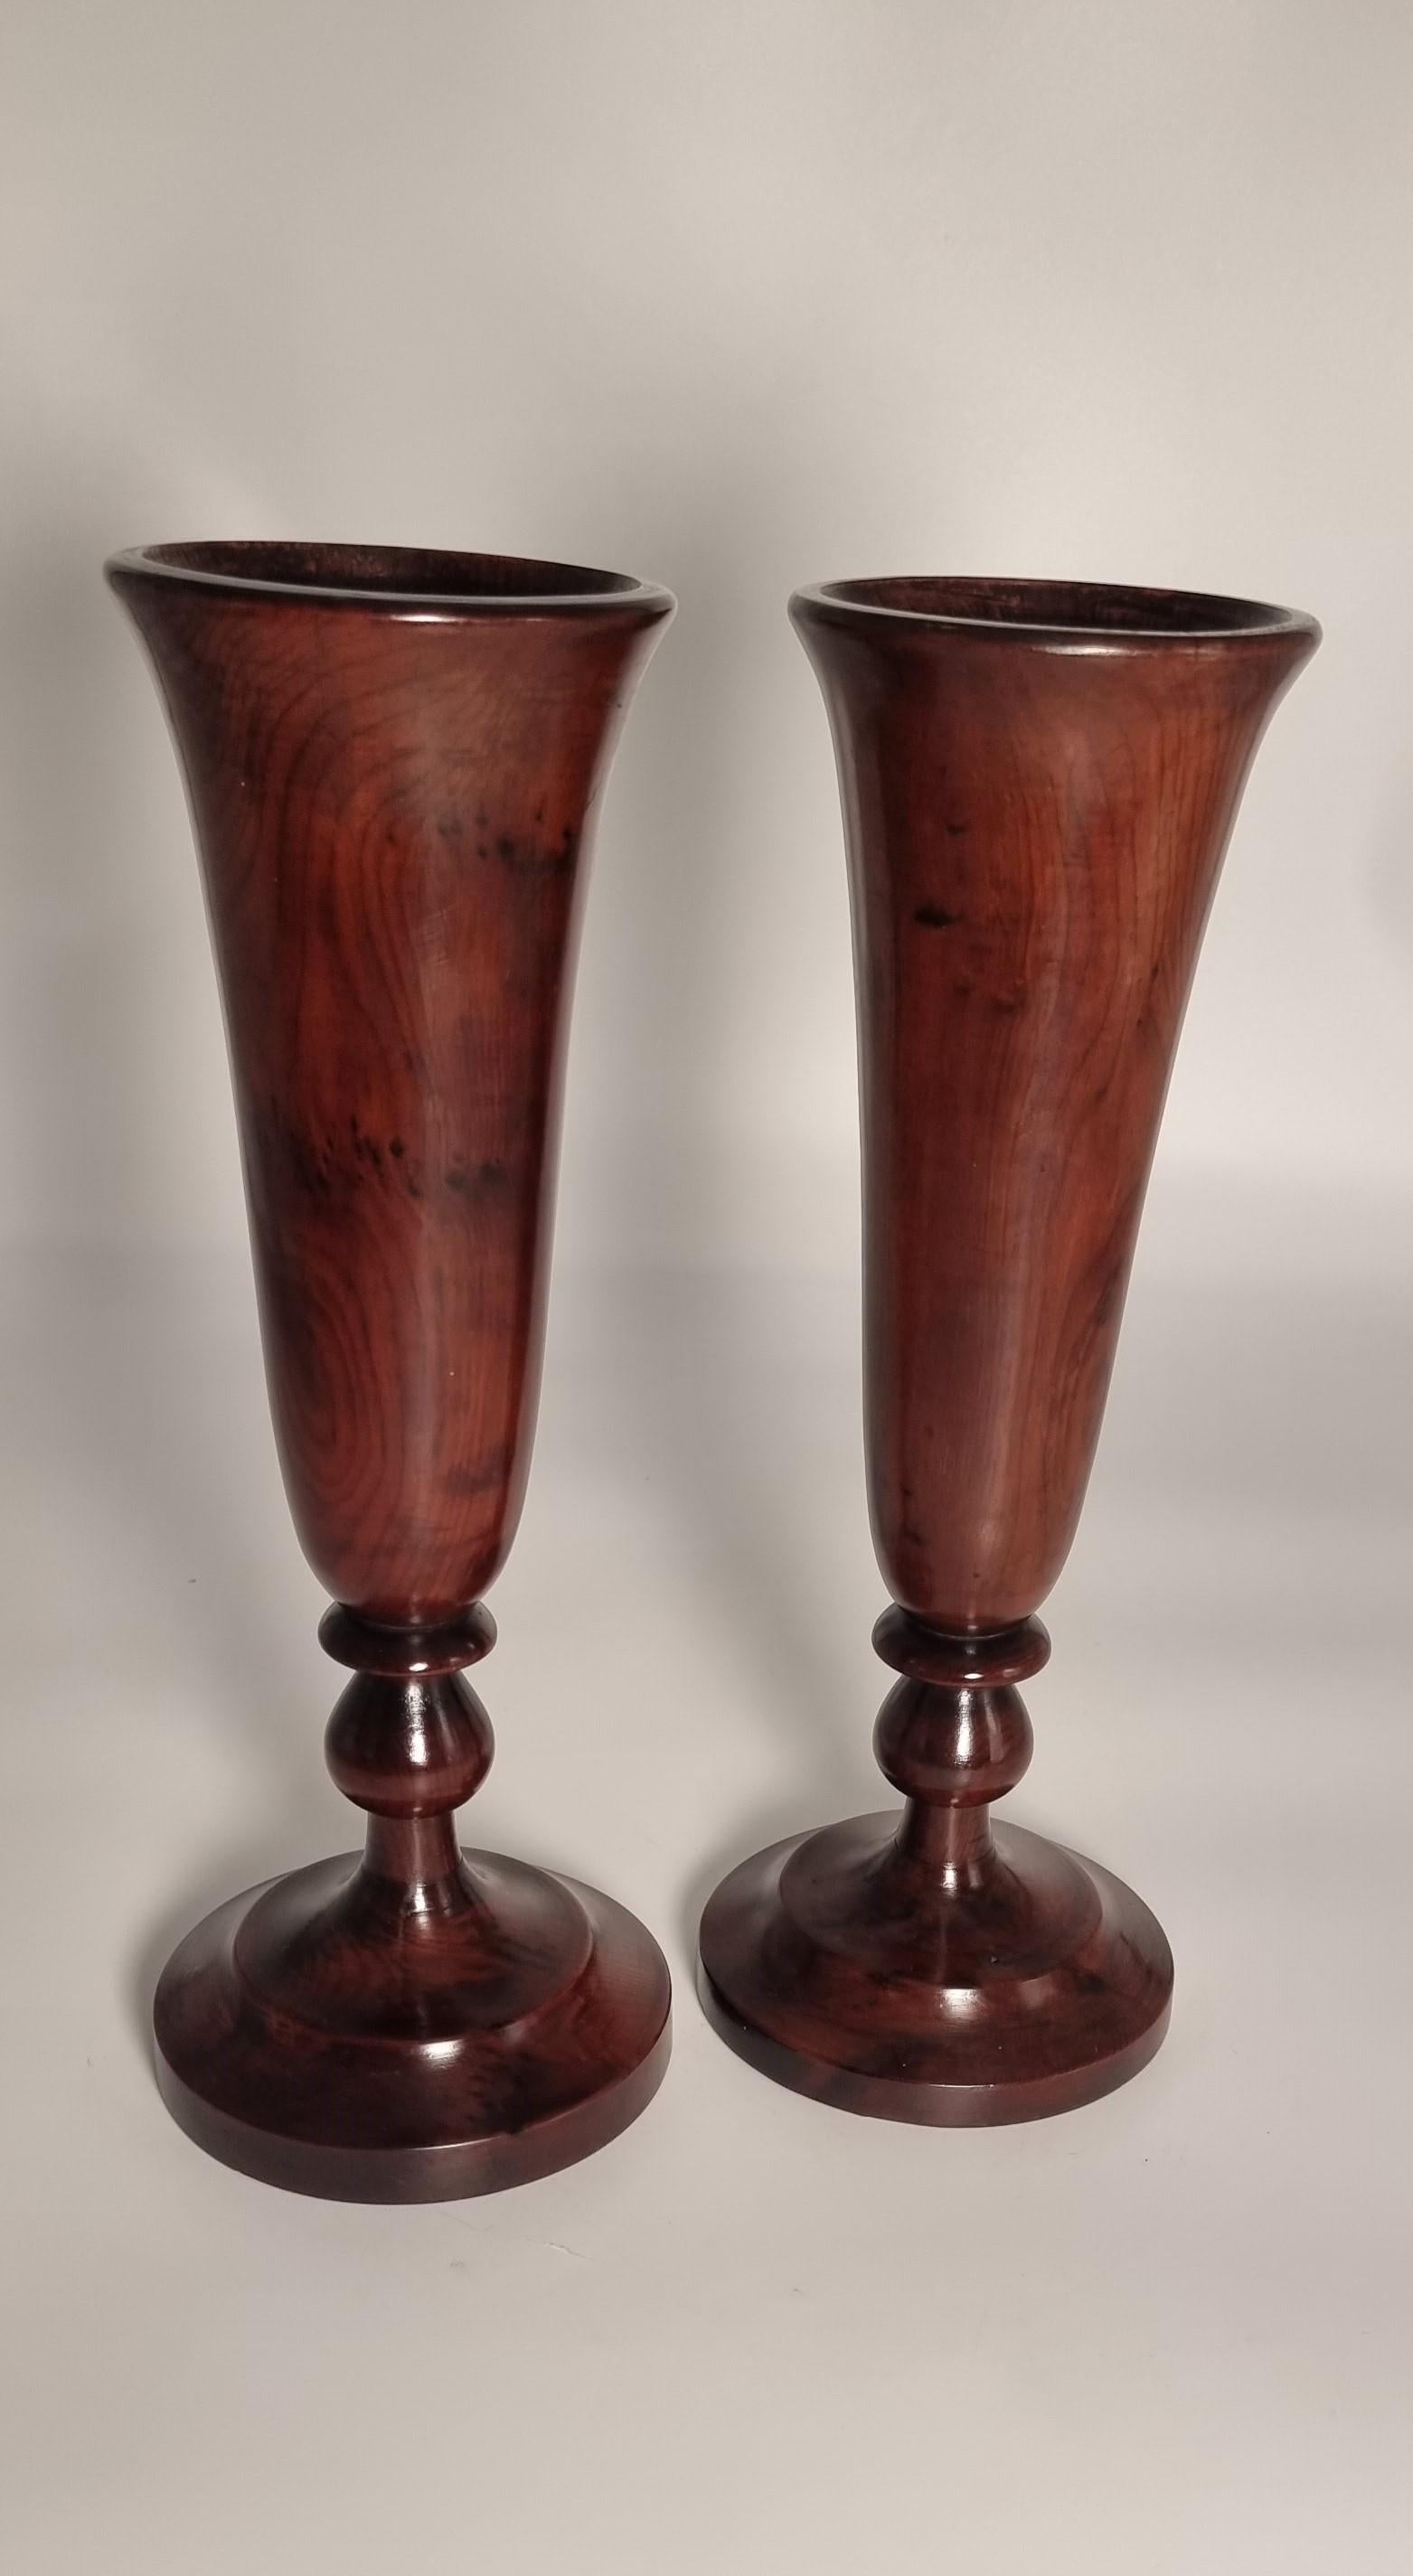 This fabulous pair of rare large yew wood treen vases are in the form of large stemmed goblets following a design similar to glassware of the period. They have been beautifully turned on a country woodman’s pole lathe in native well figured yew